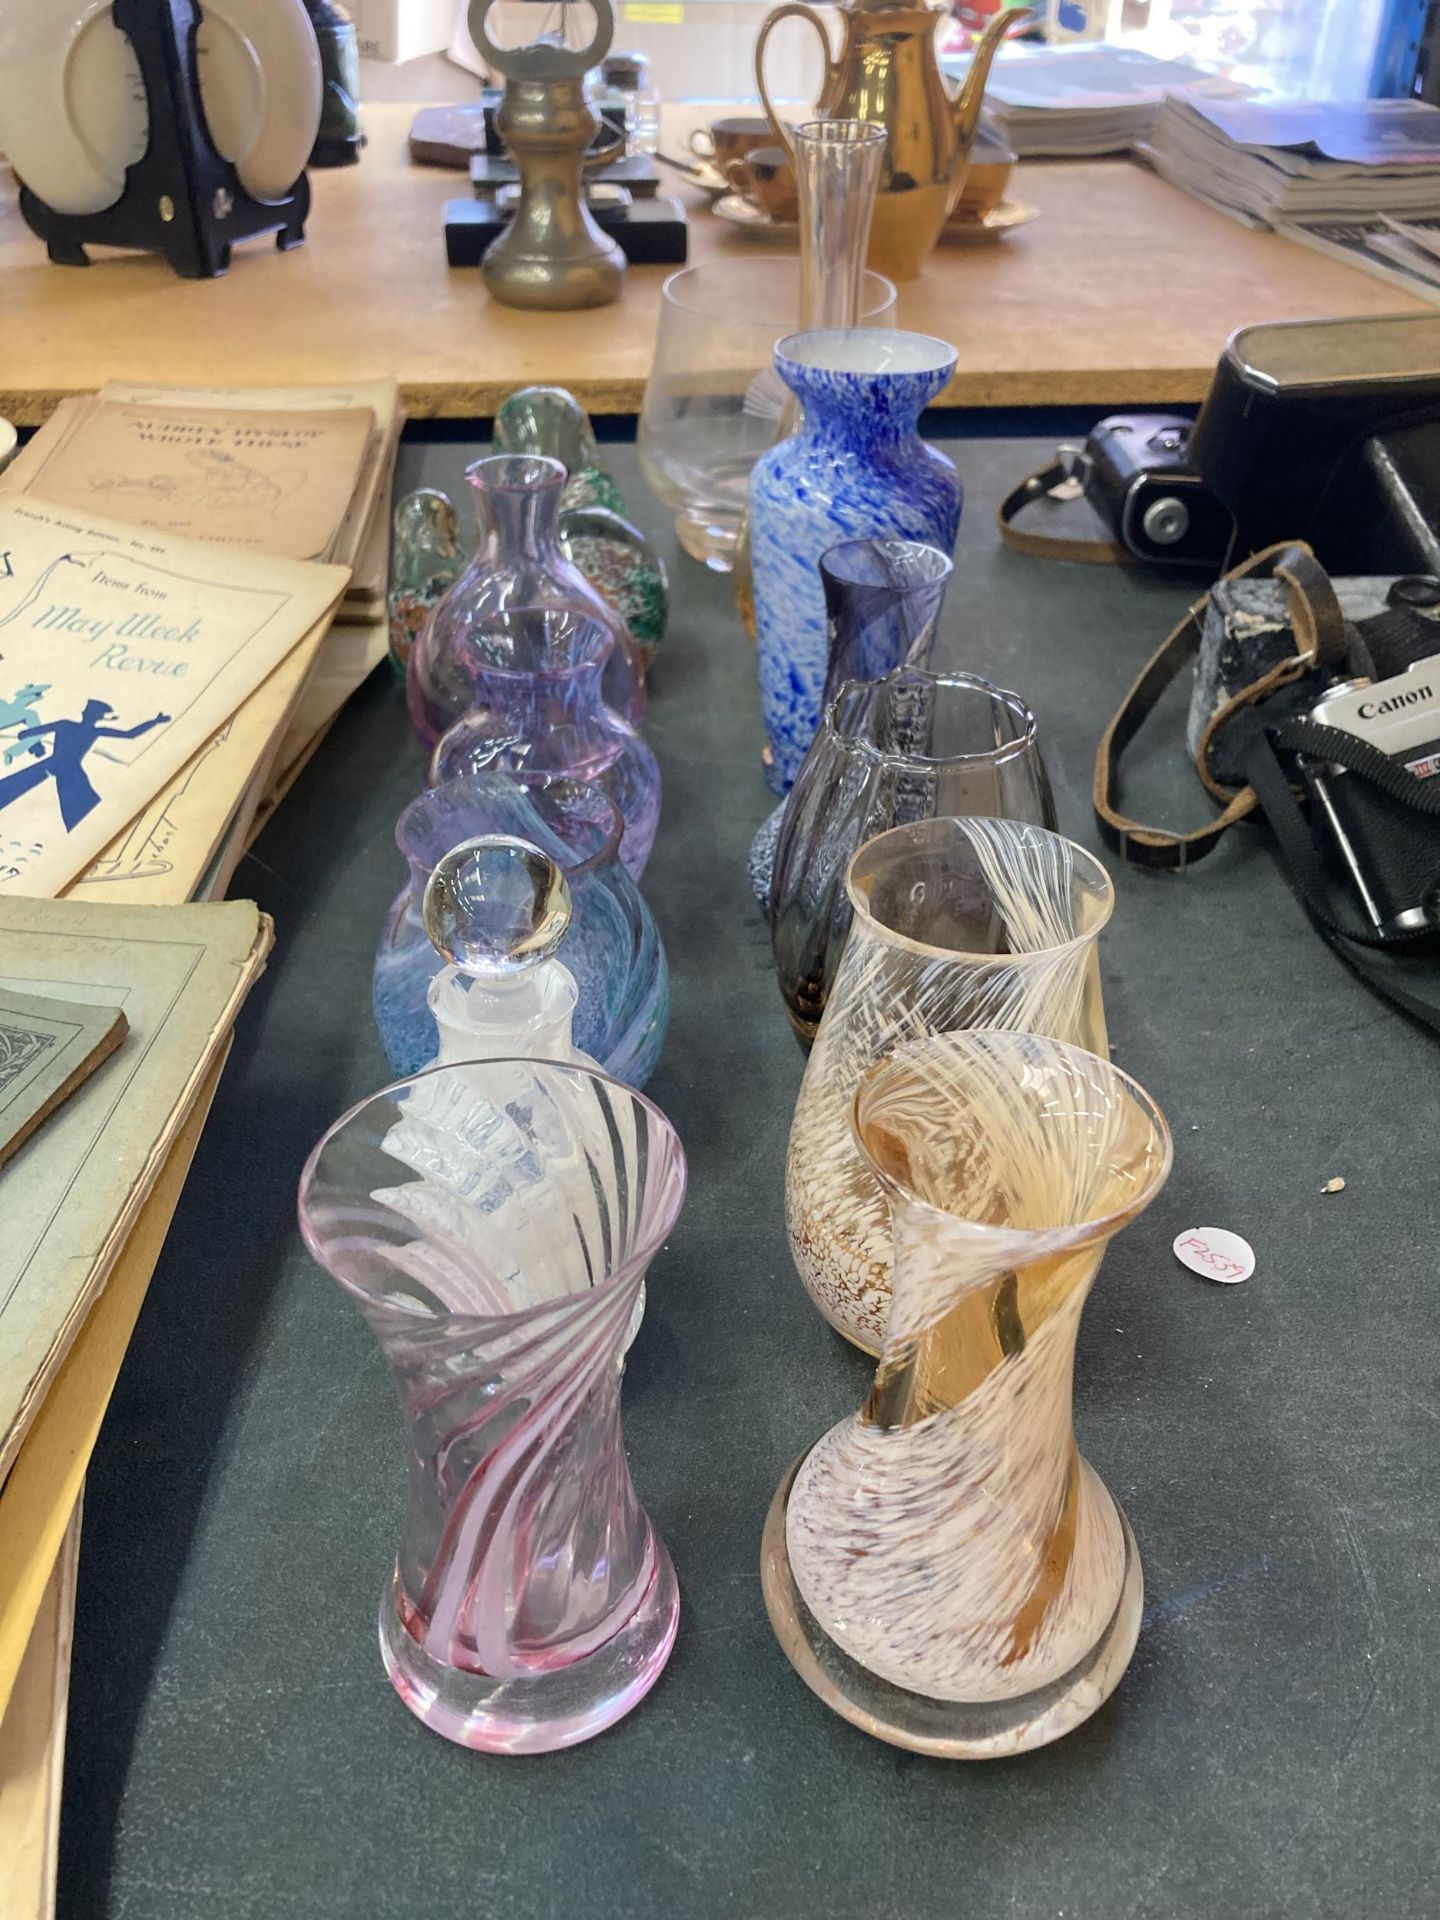 A GROUP OF ART GLASSWARE, PAPERWEIGHTS ETC